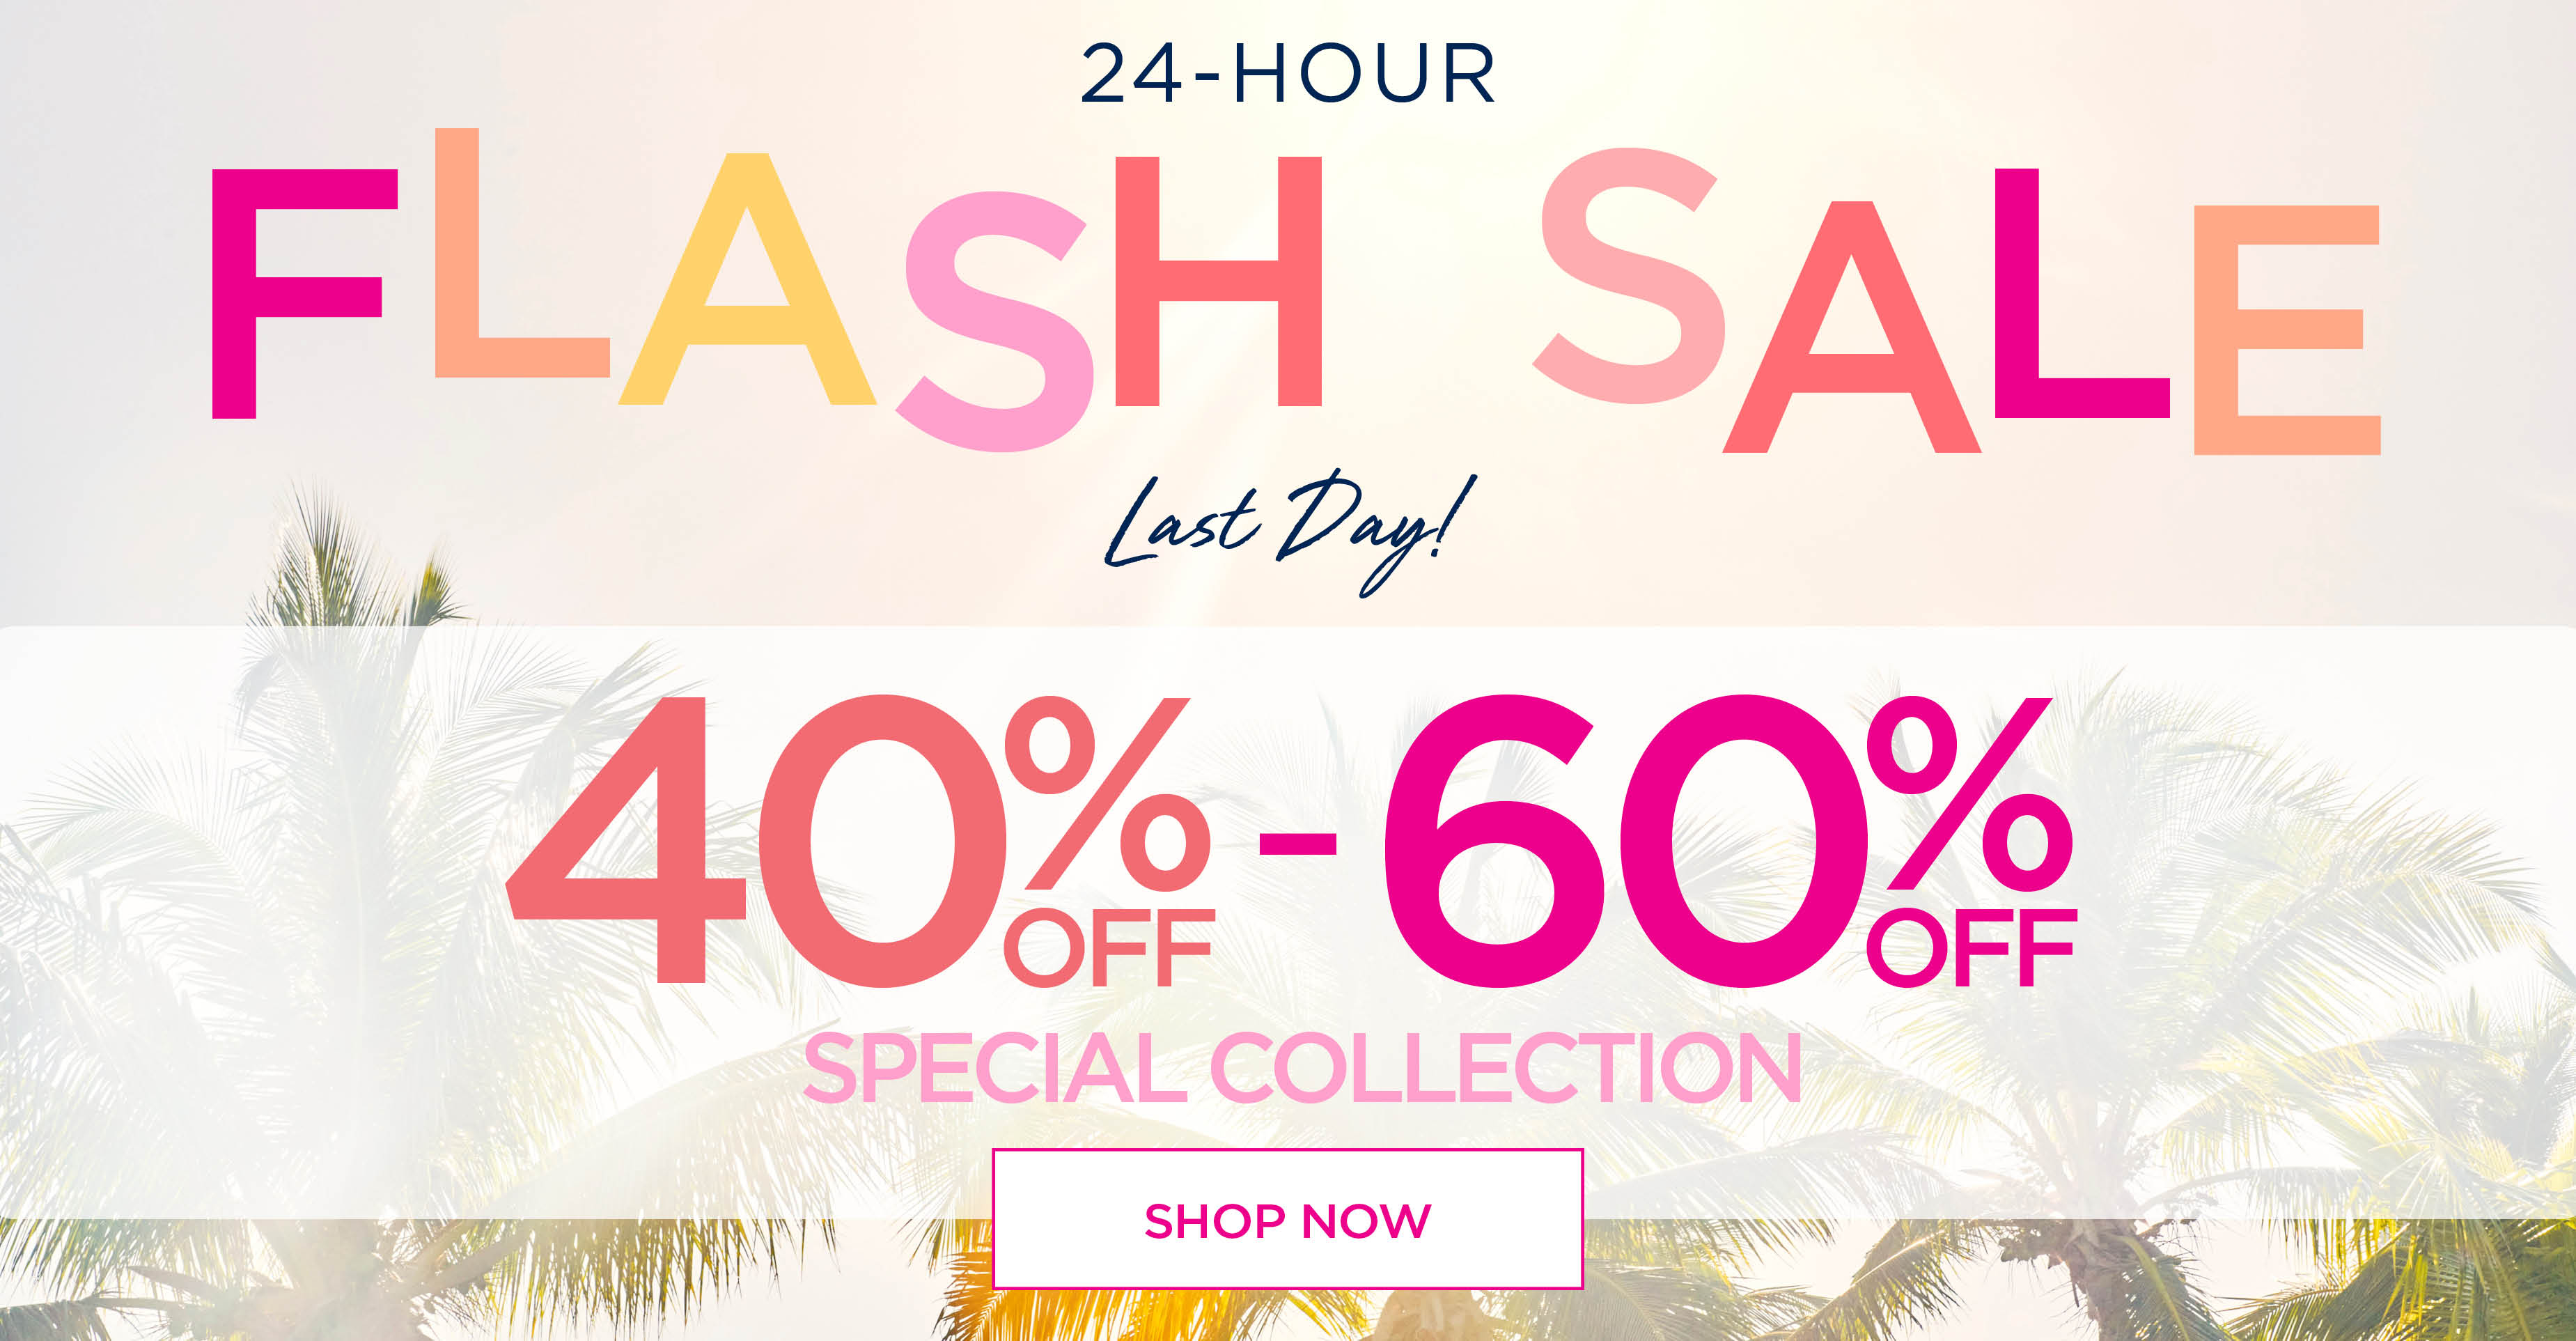 SHOP THE FLASH SALE NOW AND SAVE 40 to 60% OFF THE SPECIAL COLLECTION